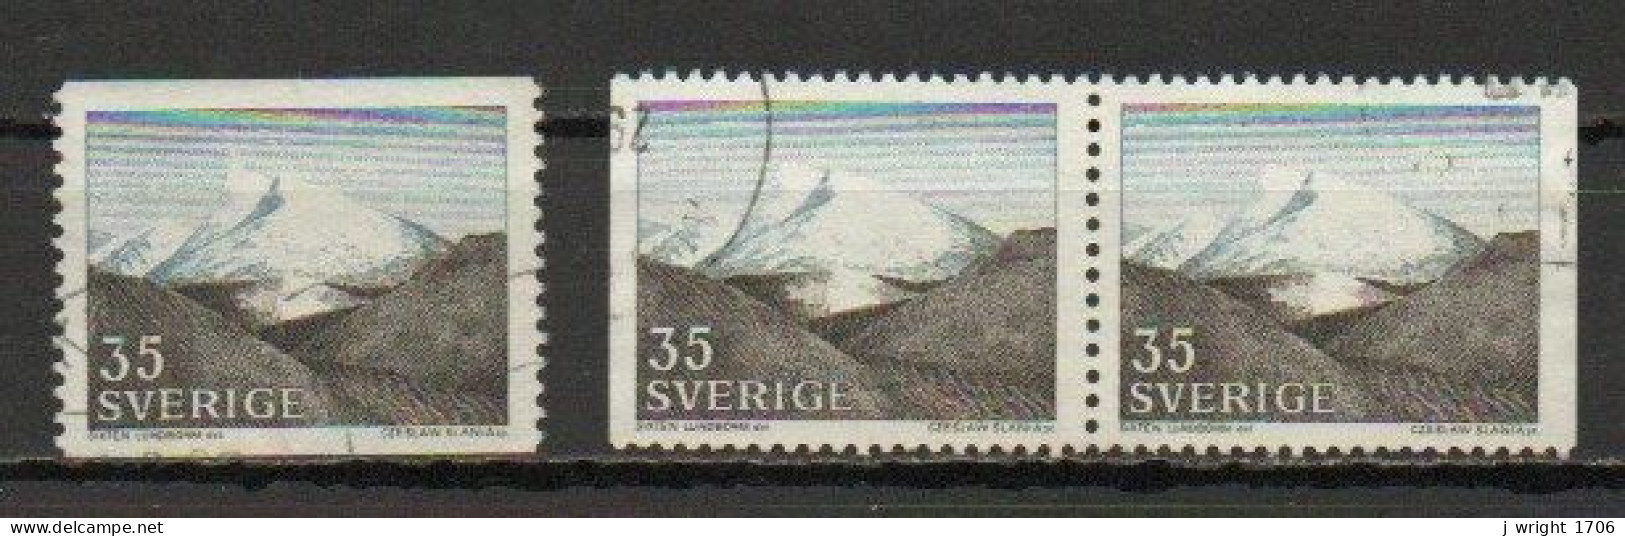 Sweden, 1967, Mountain Scenery, 35ö, USED - Usados